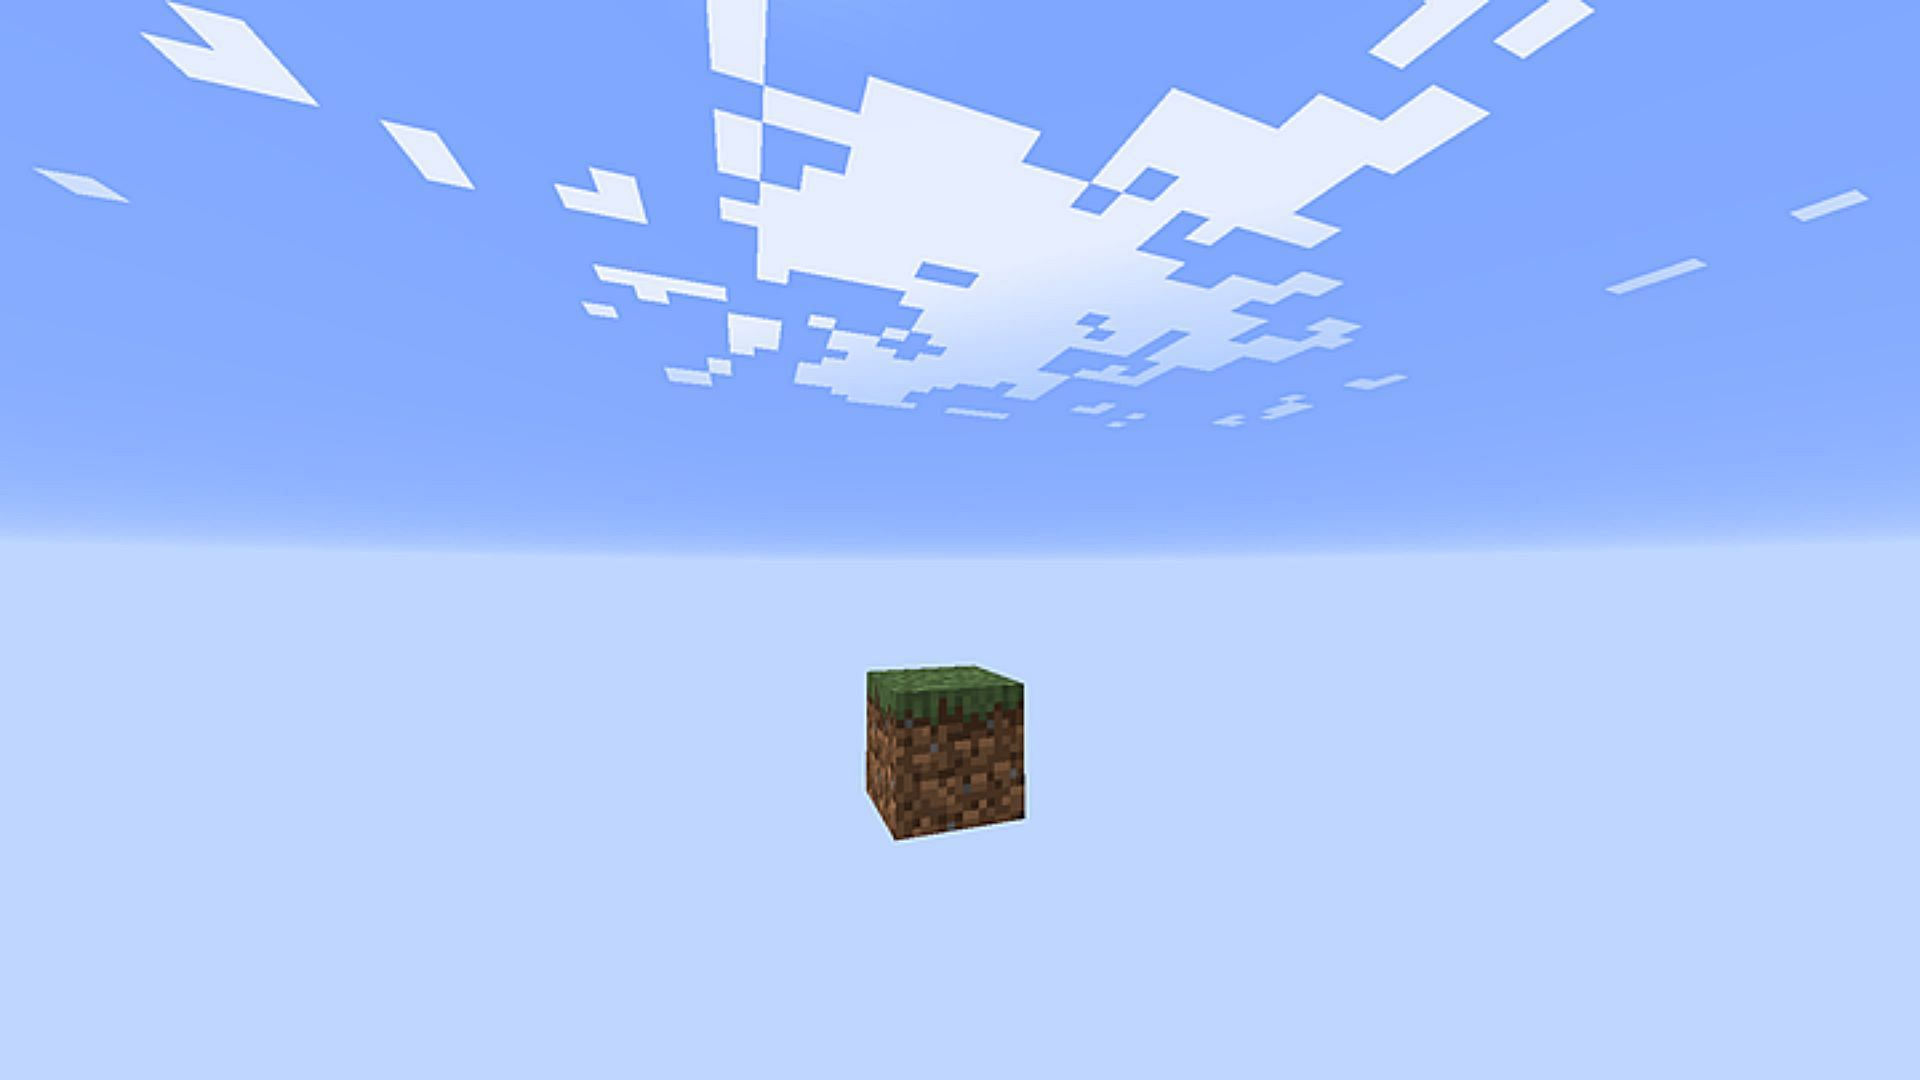 OneBlock is a new kind of custom map inspired by SkyBlock (Image via Minecraftmaps.com)